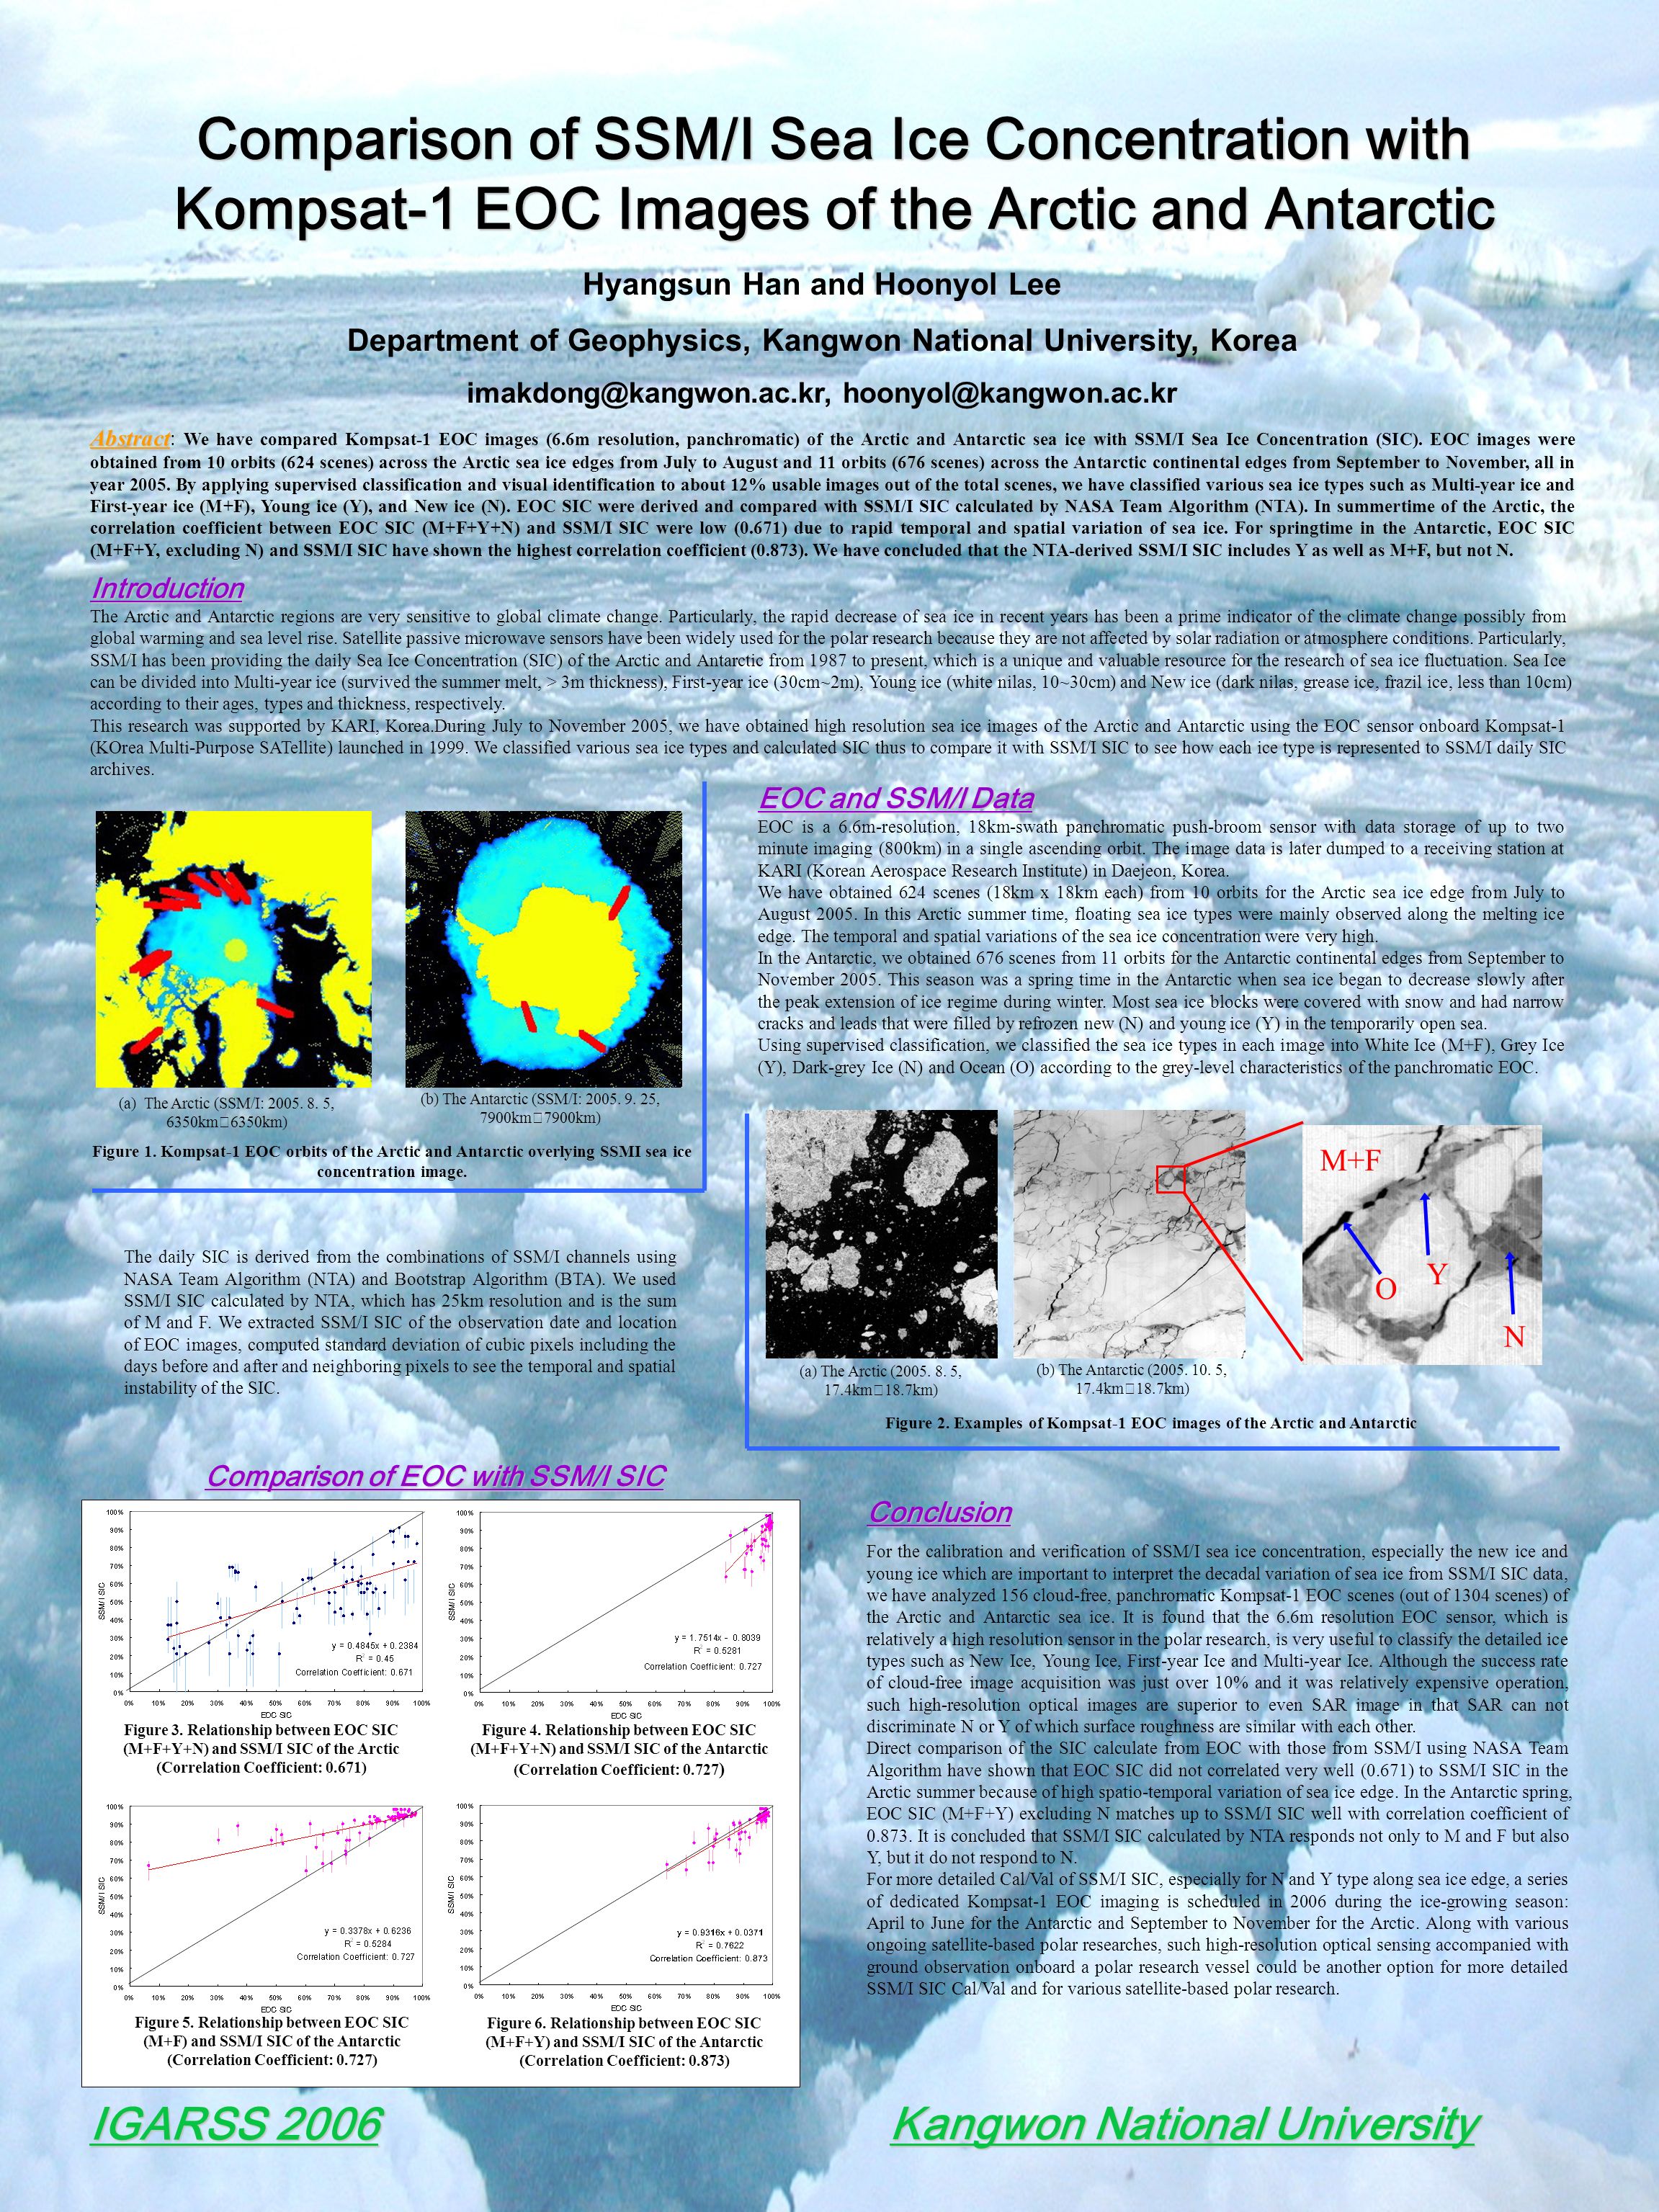 Comparison of SSM/I Sea Ice Concentration with Kompsat-1 EOC Images of the Arctic and Antarctic Hyangsun Han and Hoonyol Lee Department of Geophysics, Kangwon National University, Korea  Abstract Abstract : We have compared Kompsat-1 EOC images (6.6m resolution, panchromatic) of the Arctic and Antarctic sea ice with SSM/I Sea Ice Concentration (SIC).